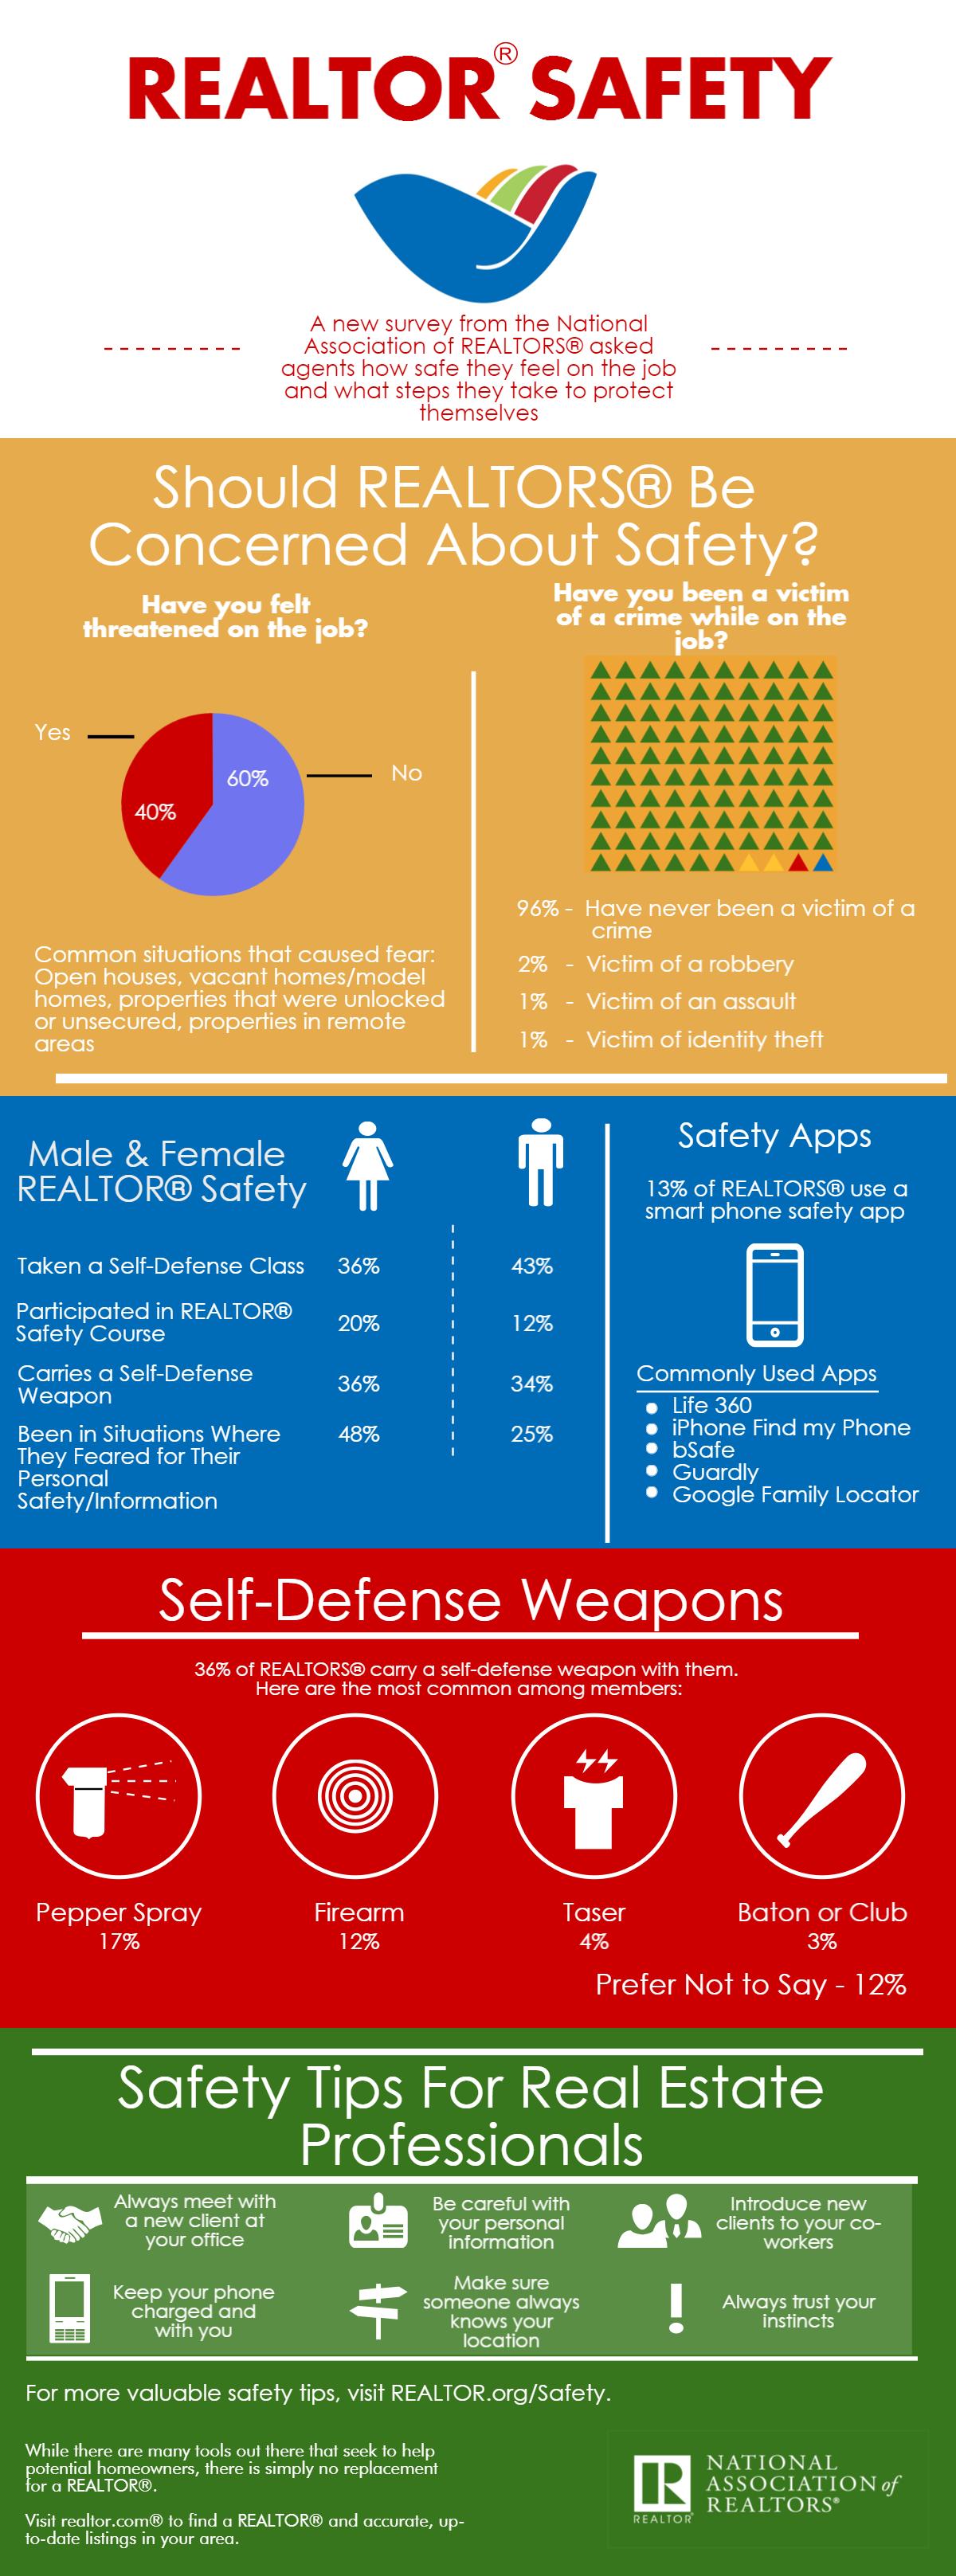 2015-realtor-safety-infographic-2015-03-02